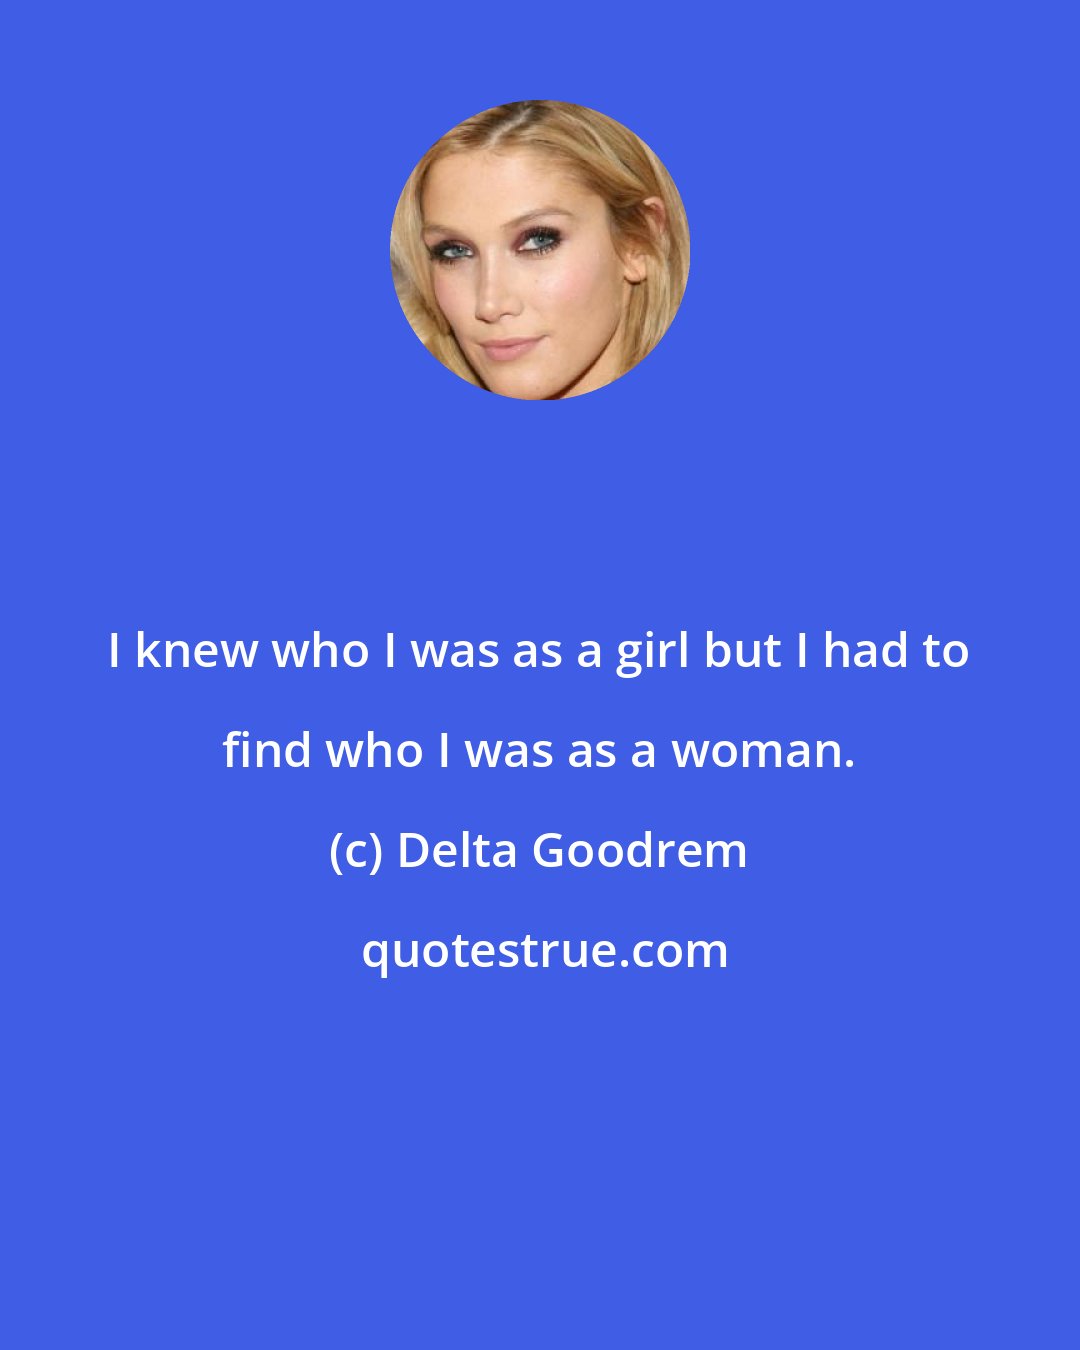 Delta Goodrem: I knew who I was as a girl but I had to find who I was as a woman.